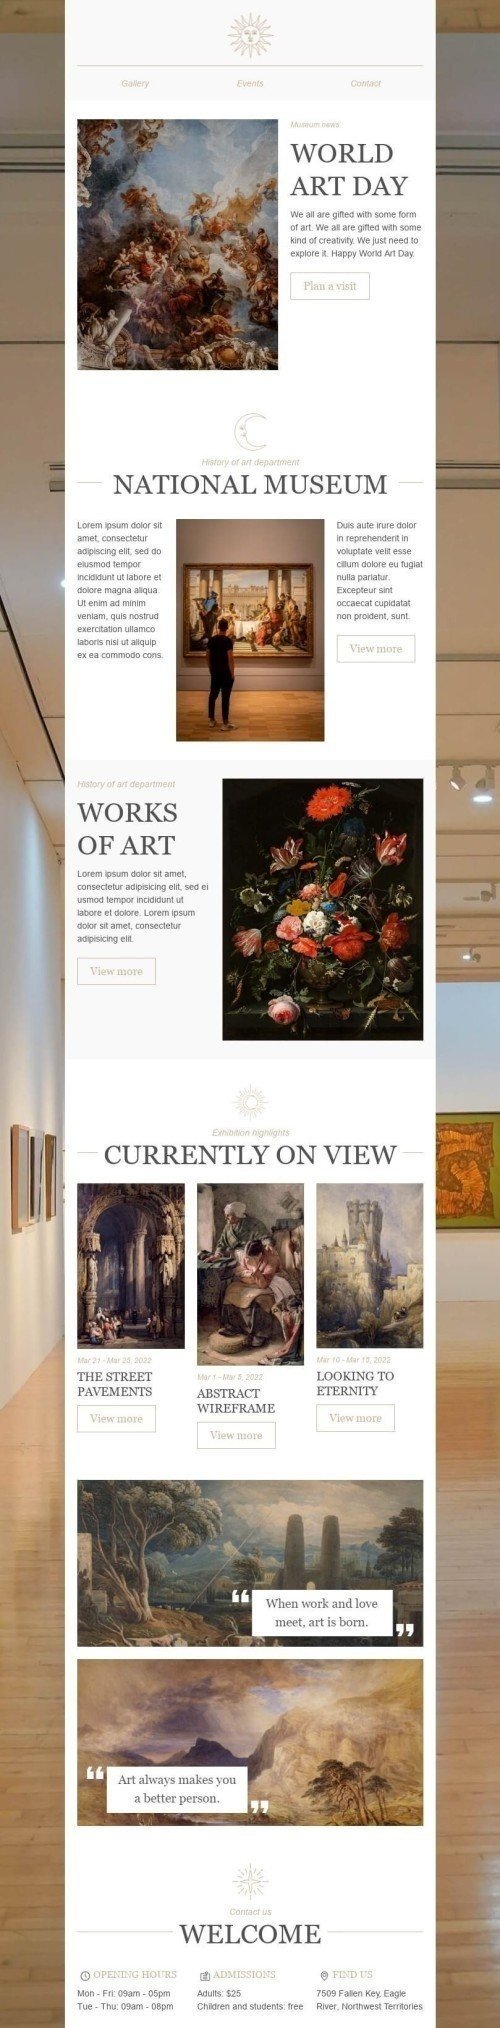 World Art Day Email Template "National Museum" for Art Gallery industry desktop view